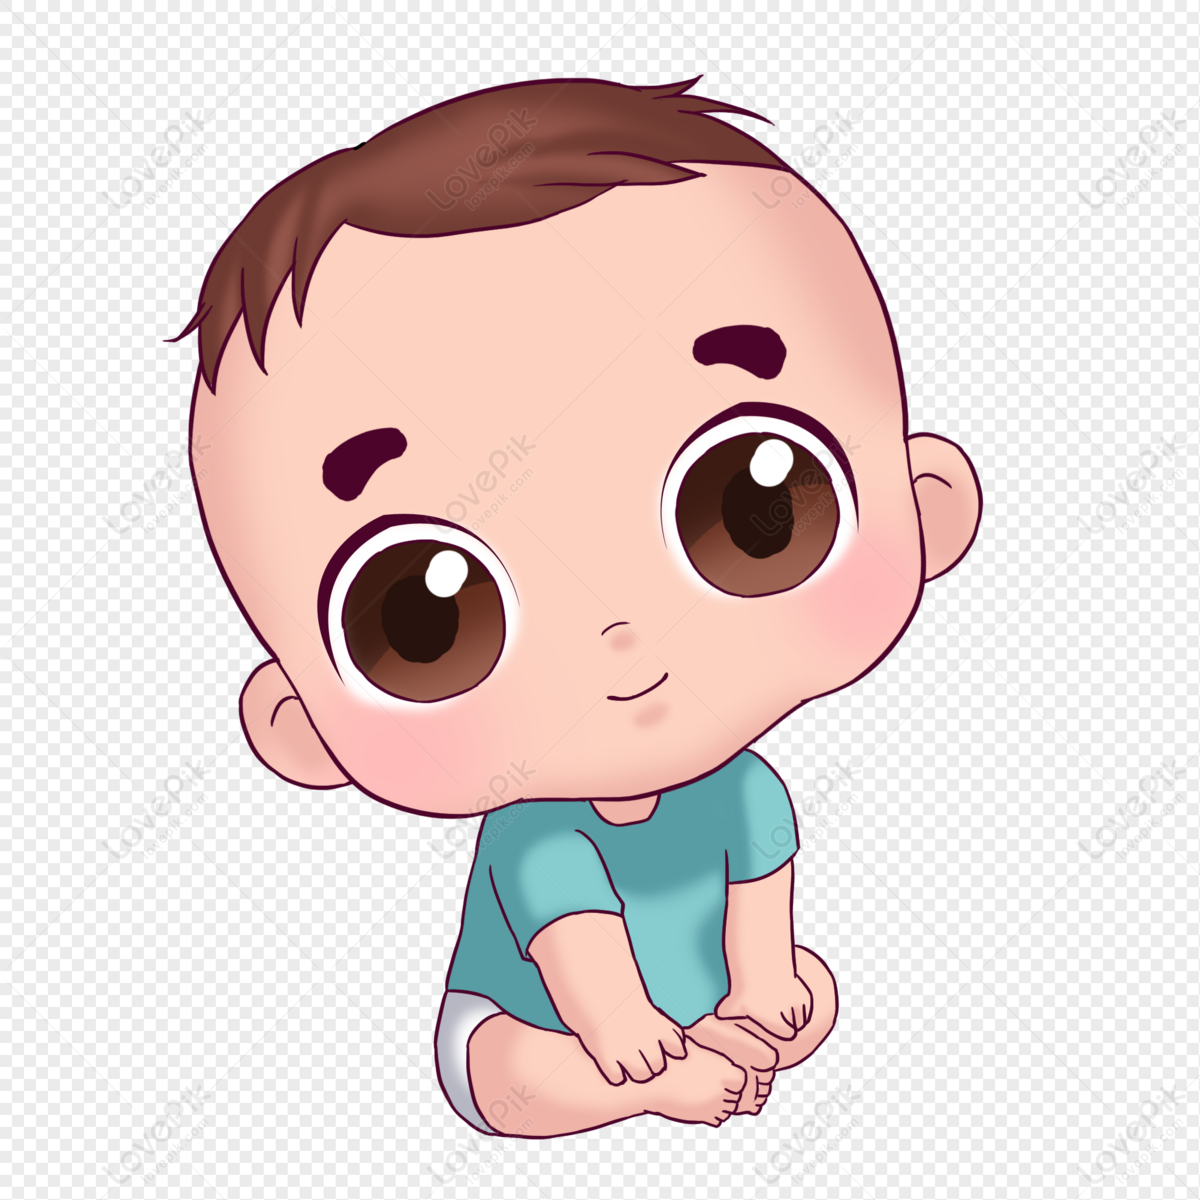 Cartoon Baby Sitting Picture PNG Free Download And Clipart Image For Free  Download - Lovepik | 401565323